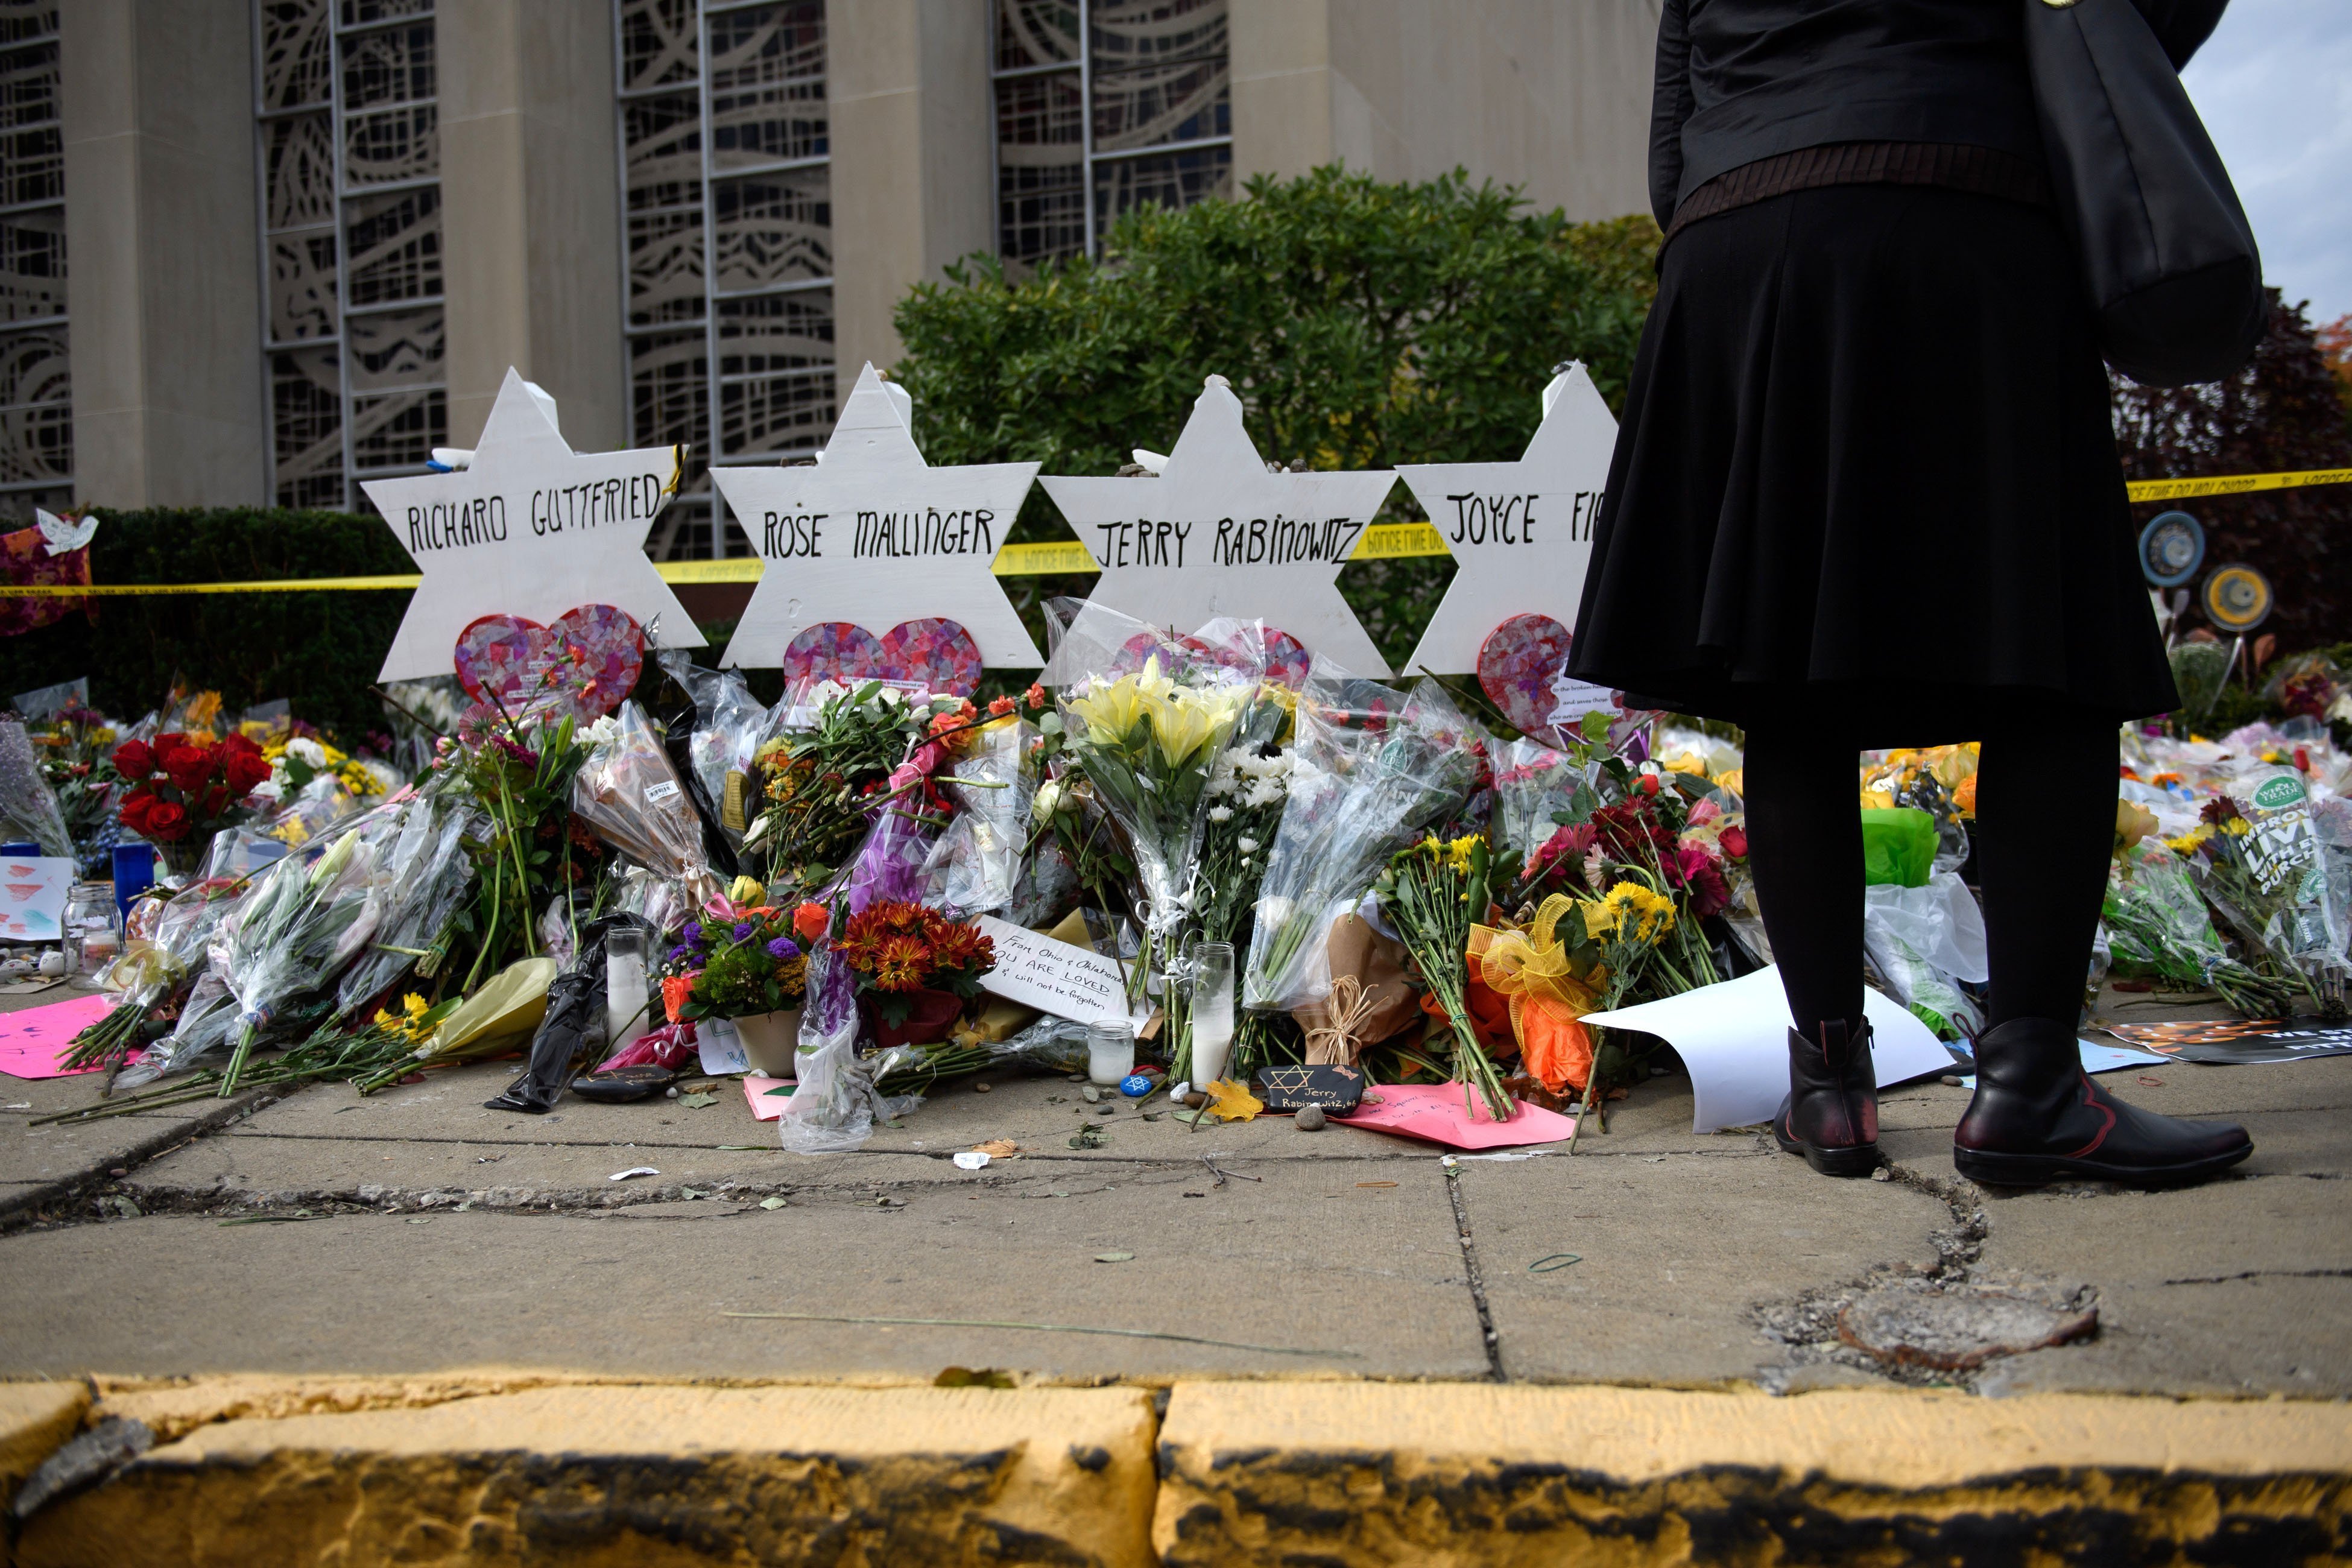 Flowers in memory of those who perished in the Pittsburgh shooting - Getty Images